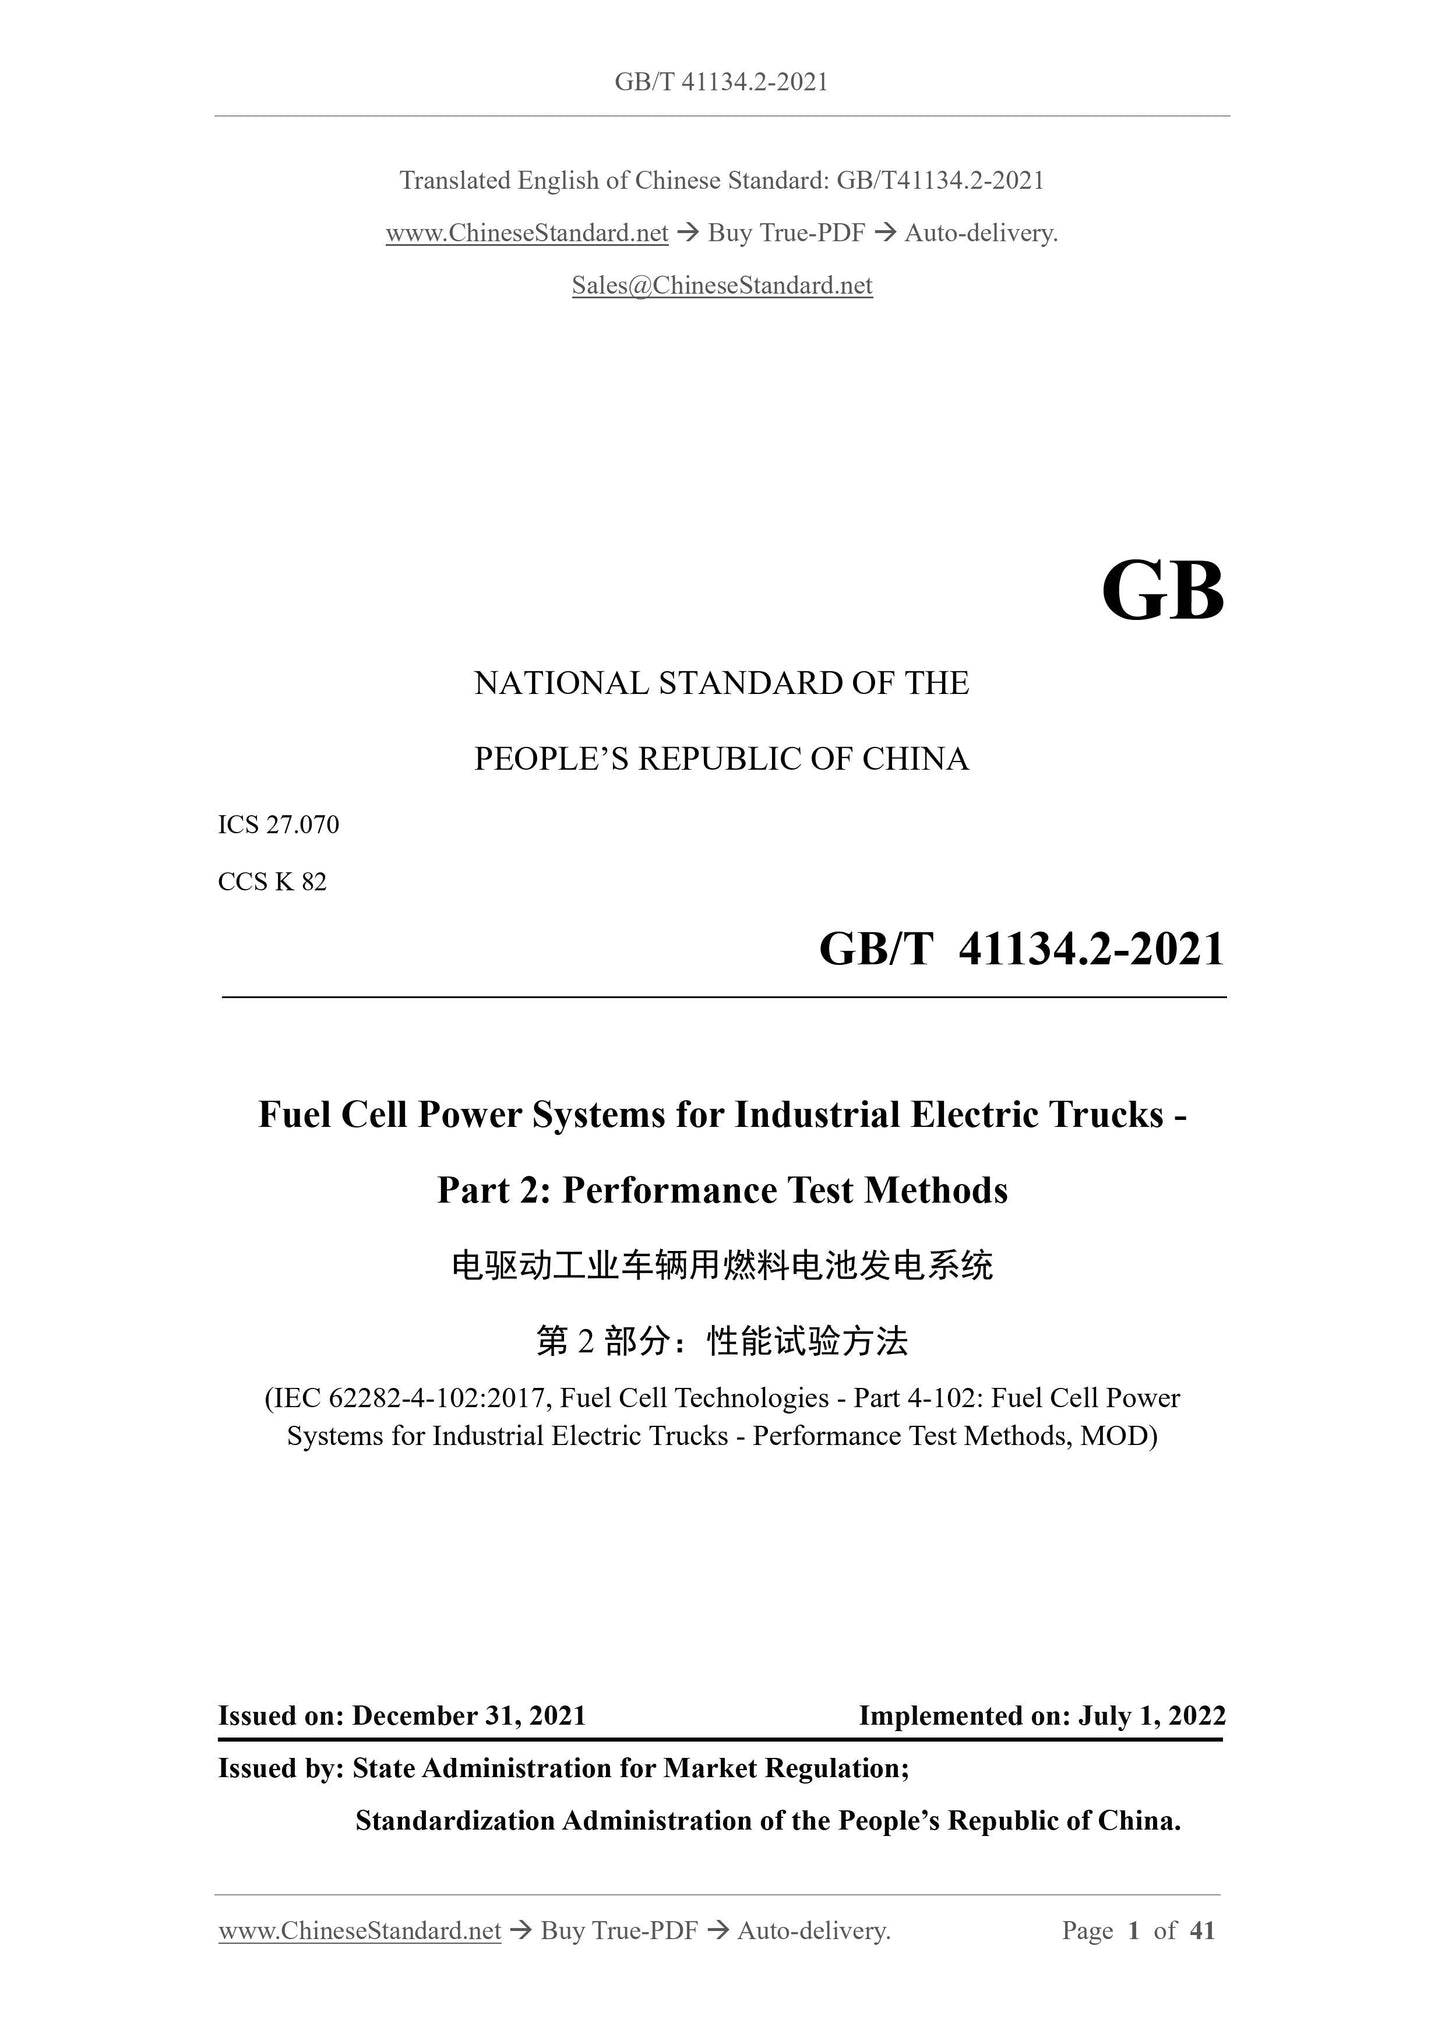 GB/T 41134.2-2021 Page 1